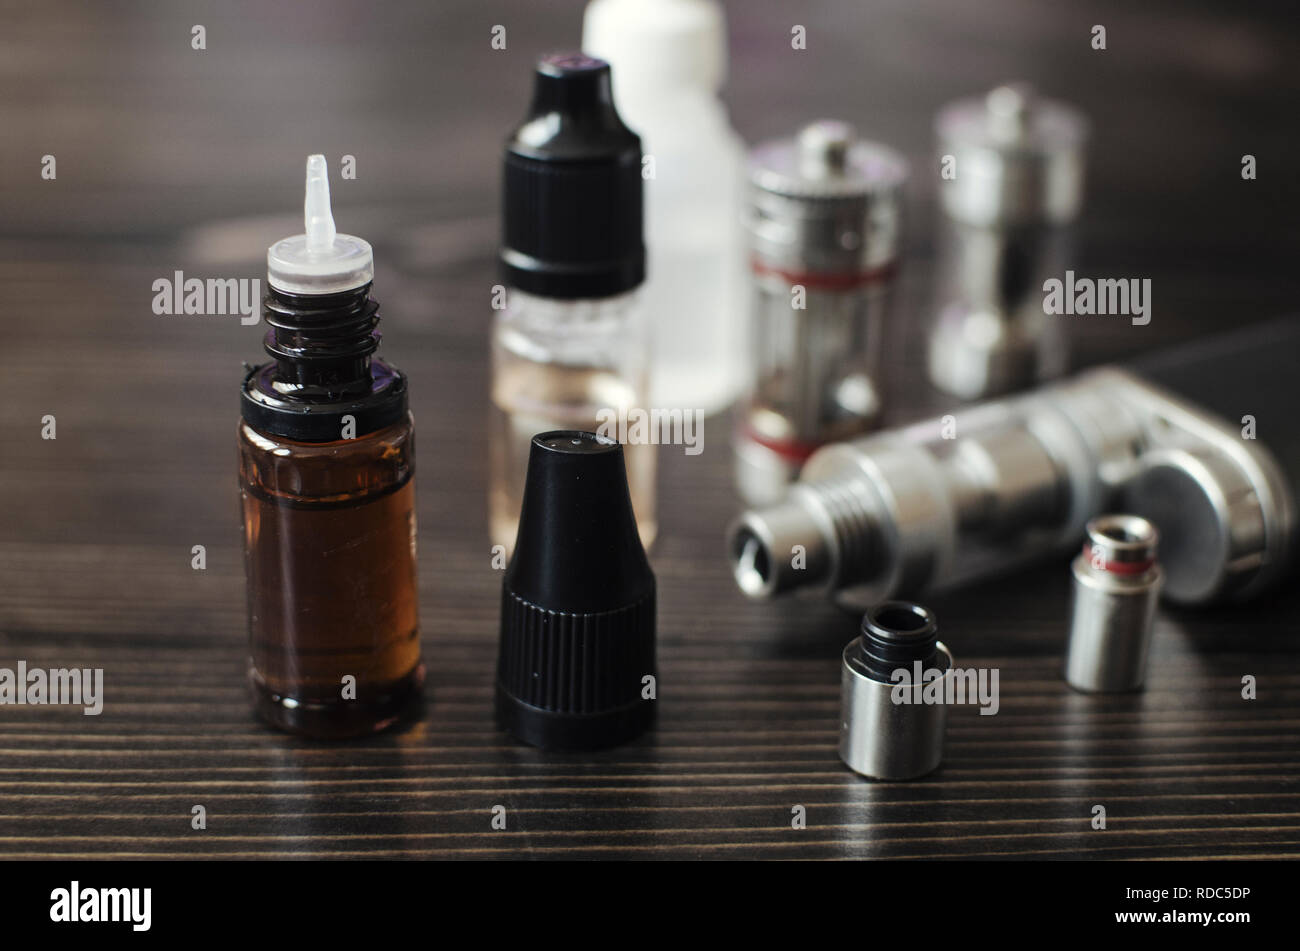 Kit for healthy smoking on wooden background, e-cigarette Stock Photo